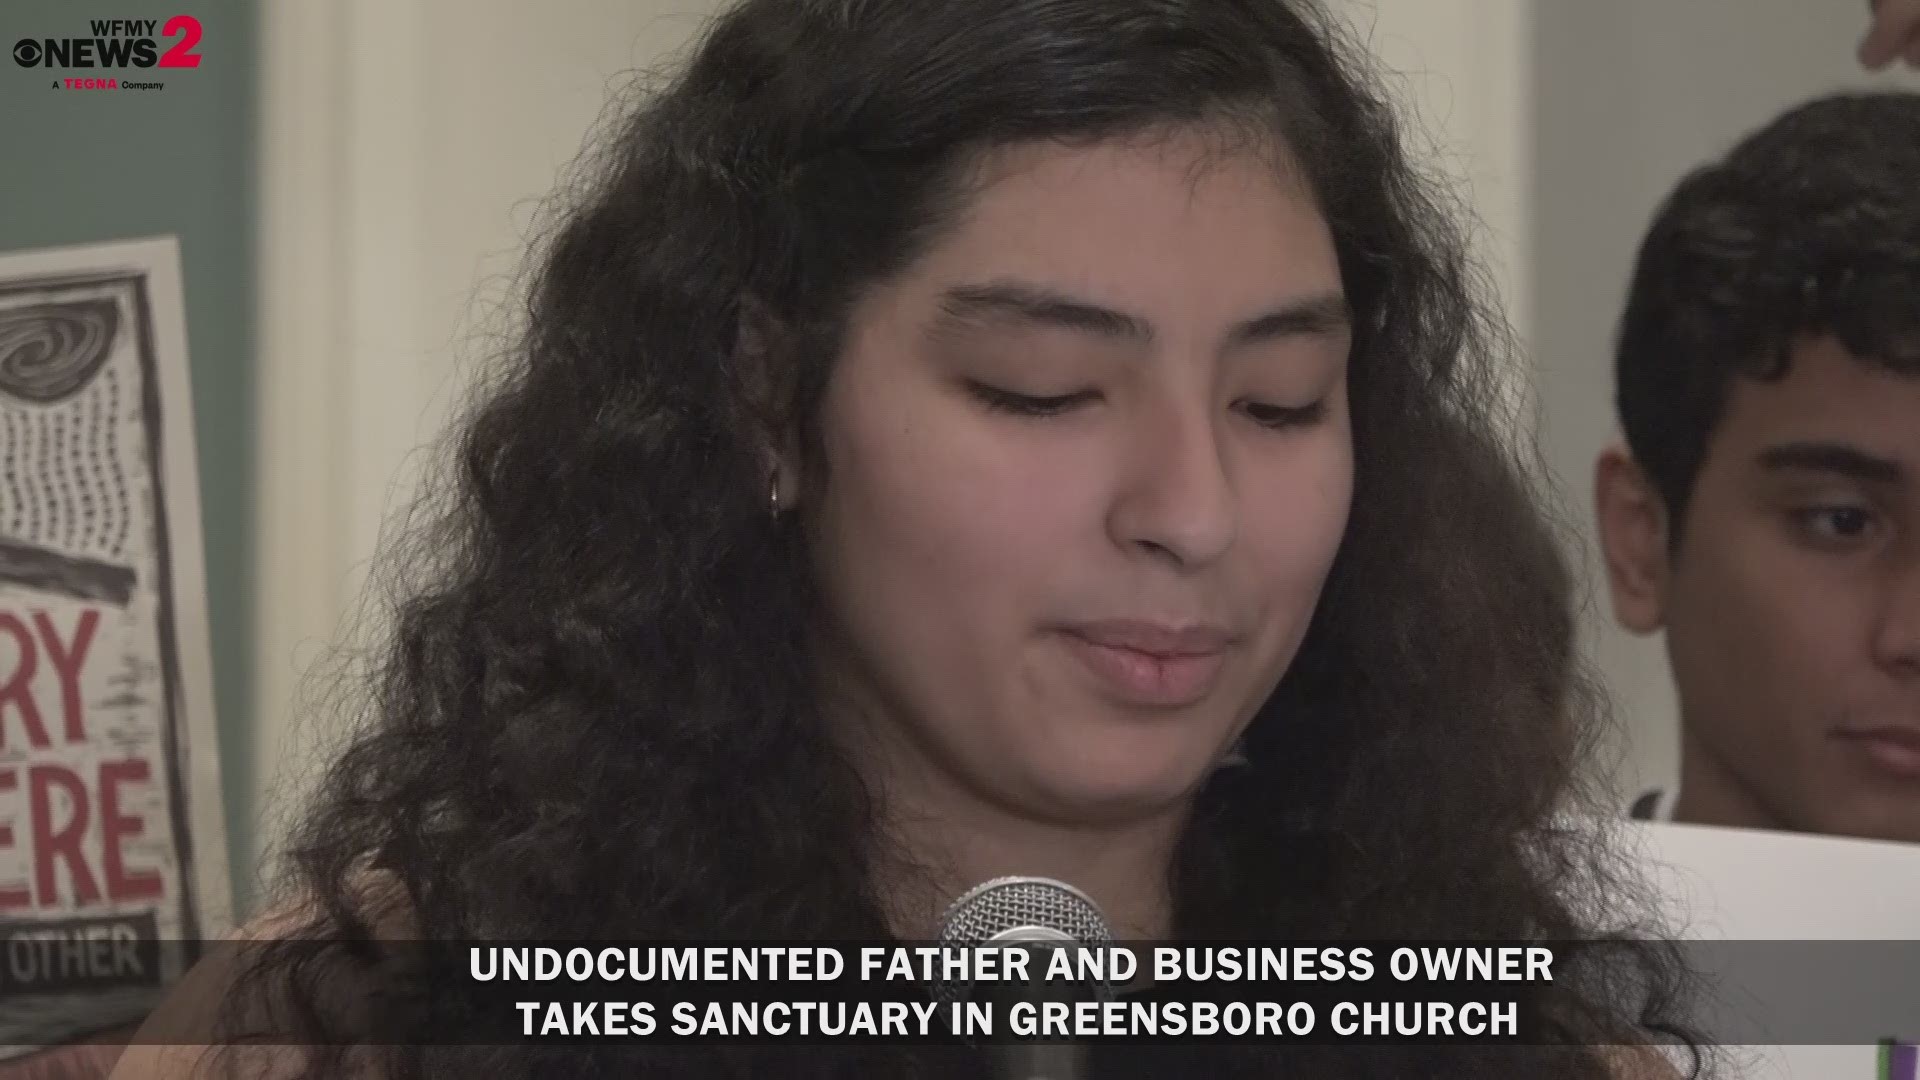 Undocumented Father, Business Owner Takes Sanctuary In Greensboro Church